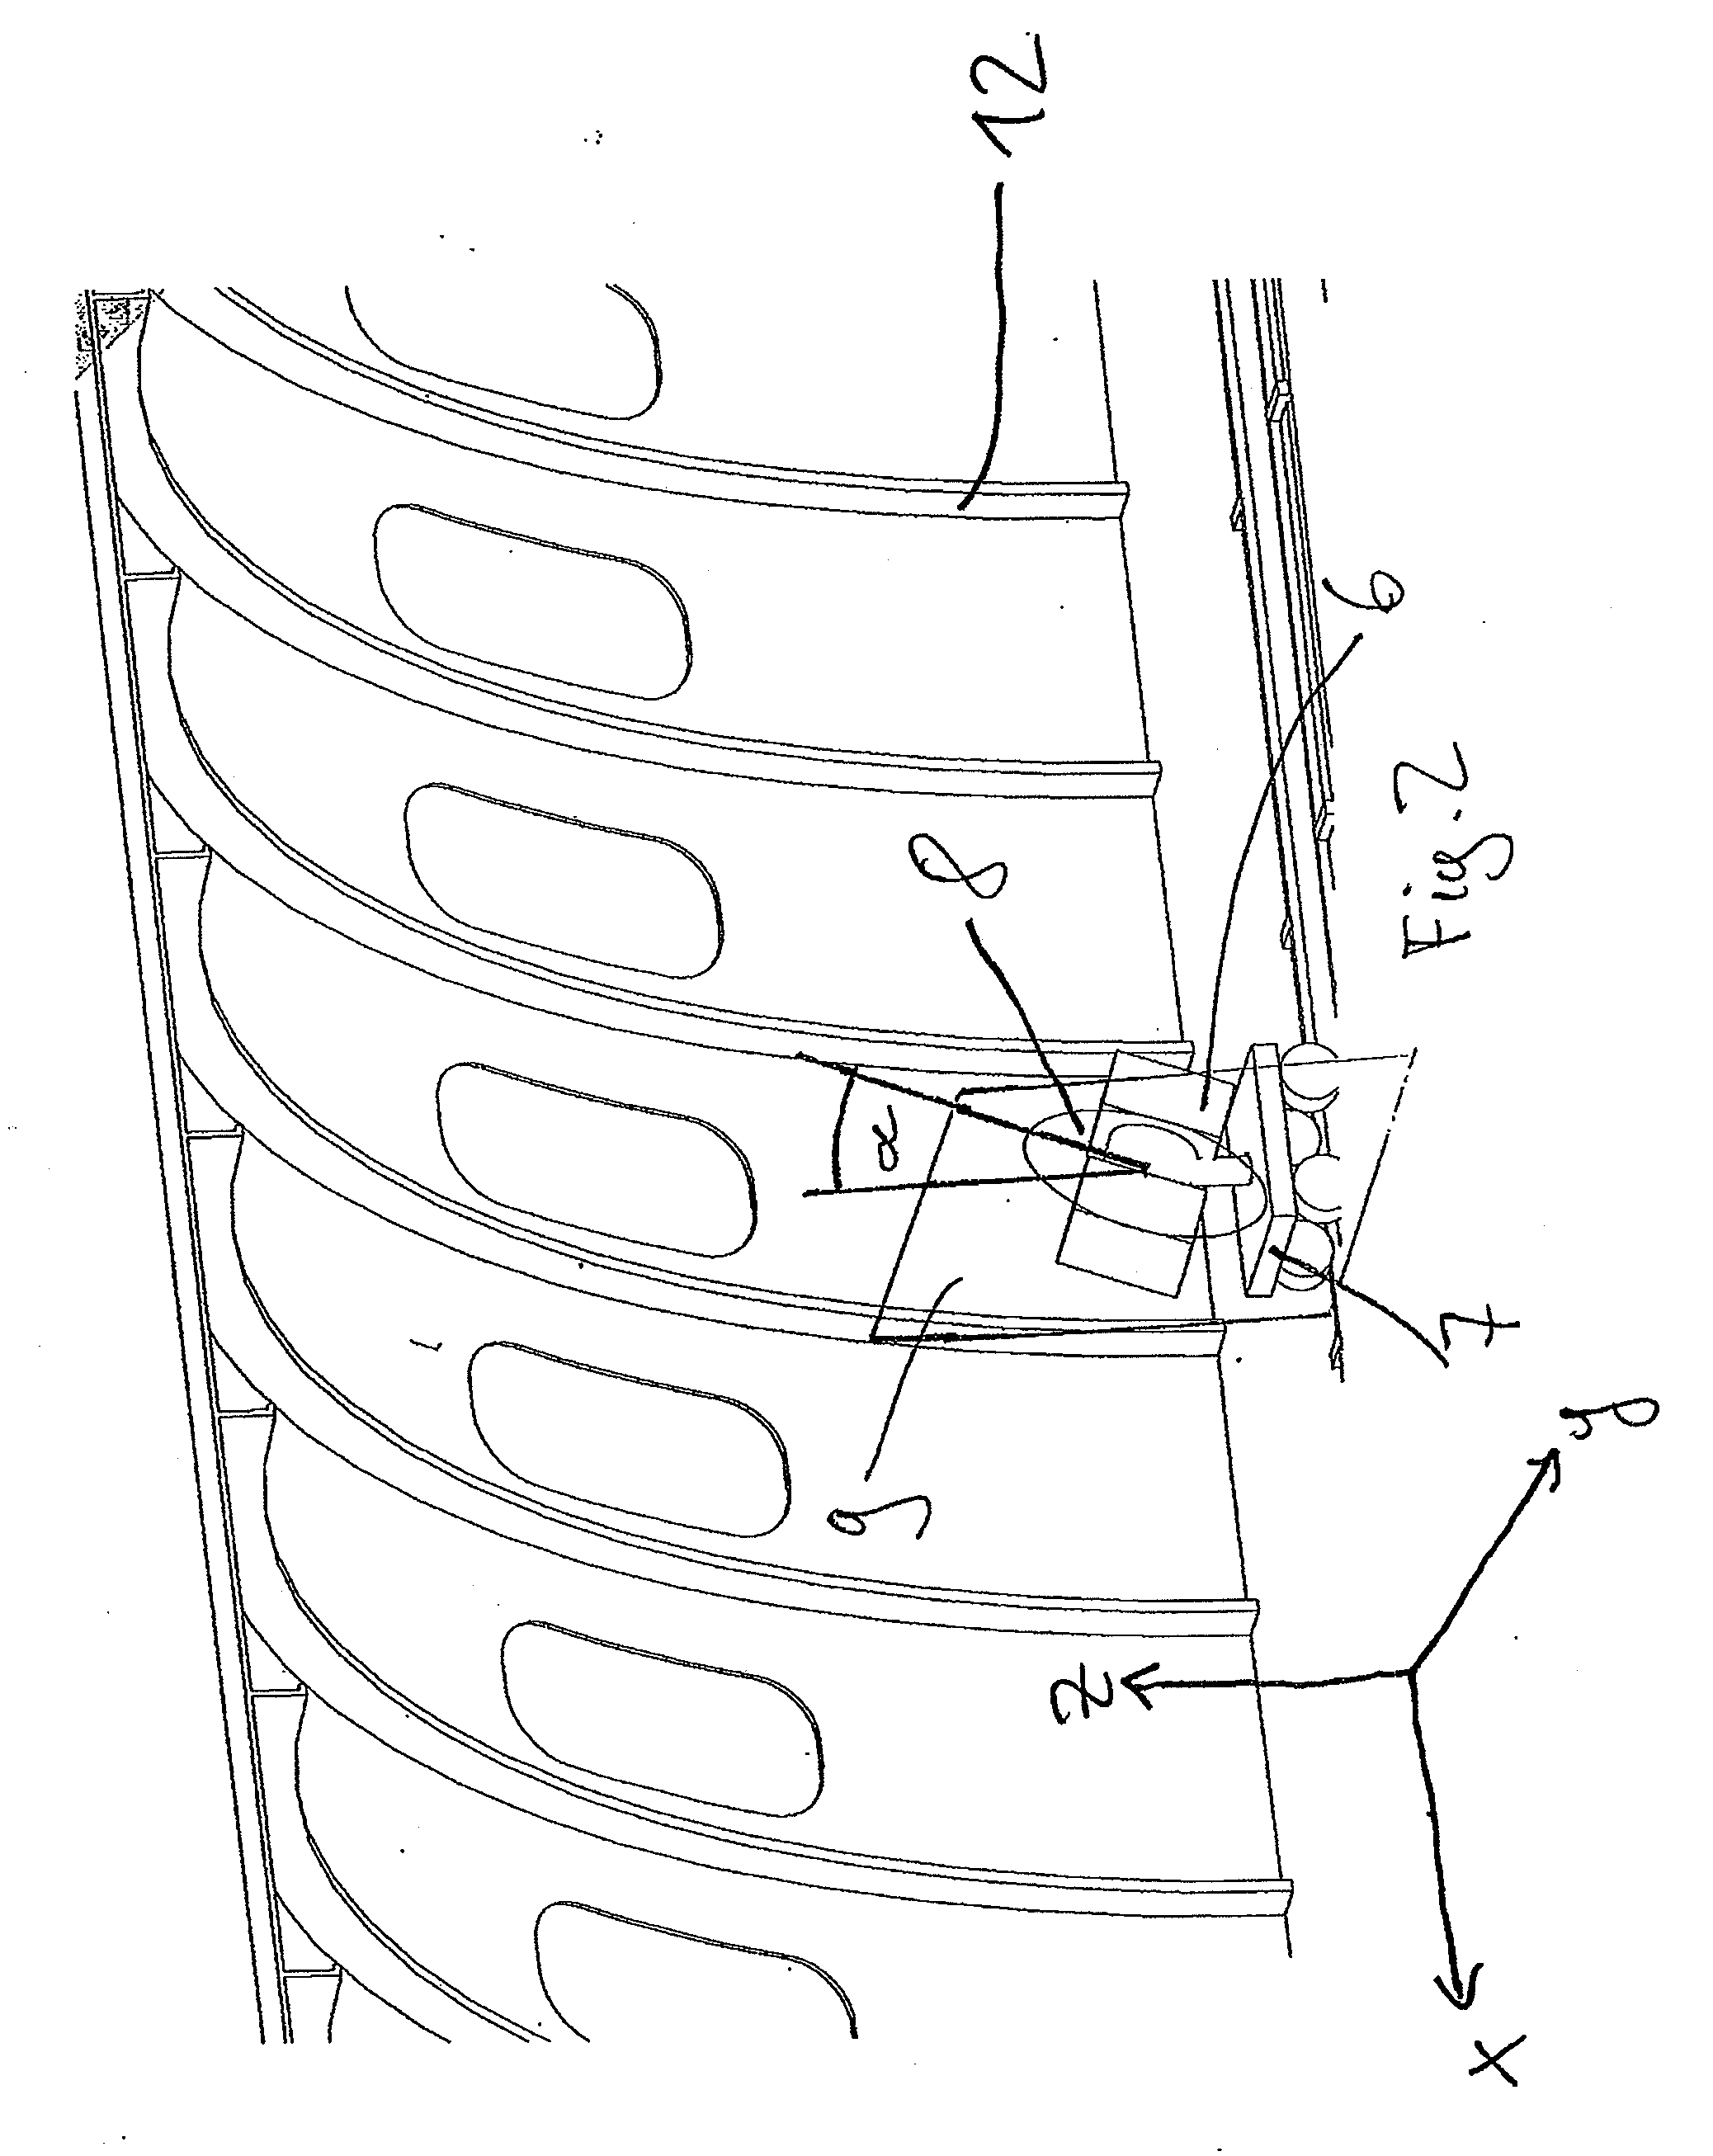 Method for measuring the internal space of an aircraft